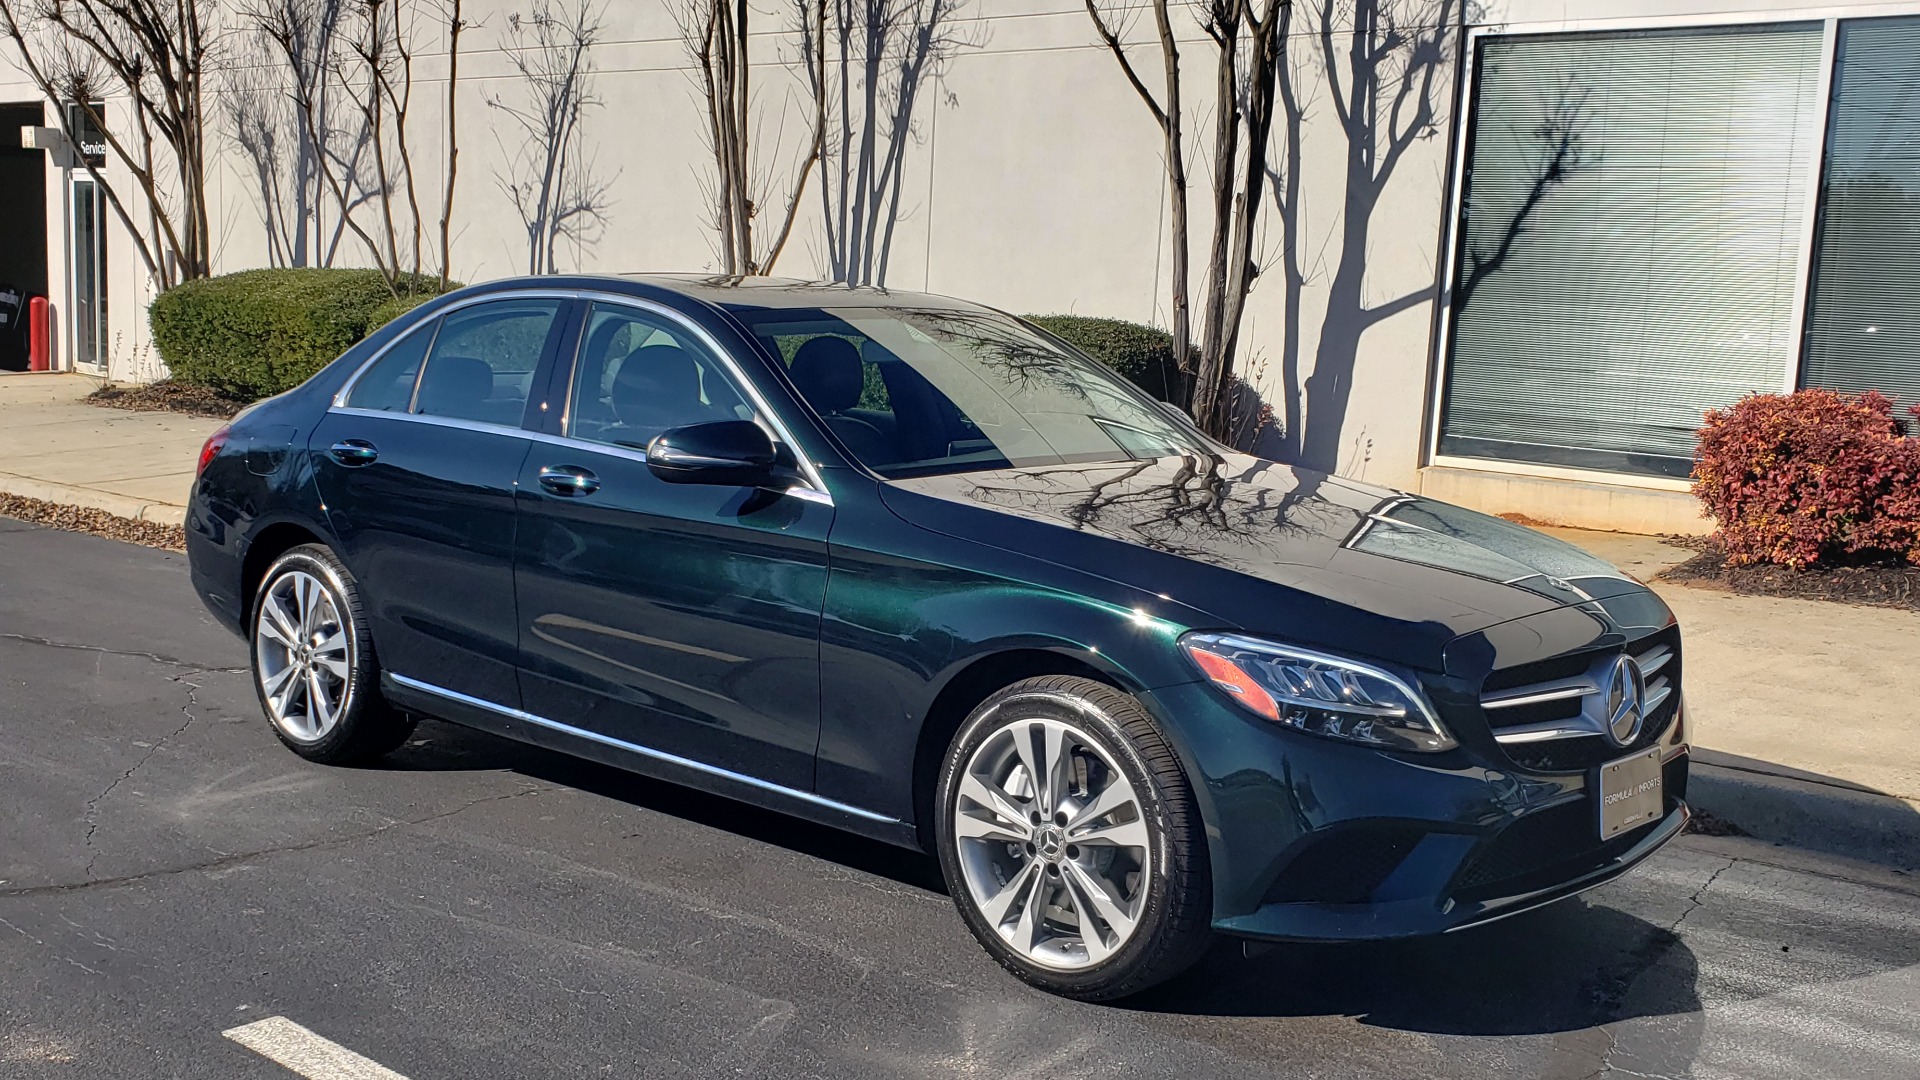 Used 2019 Mercedes-Benz C-CLASS C 300 4MATIC PREMIUM 2.0L SEDAN / BURMESTER SND / SUNROOF / BLIND SPOT ASST for sale Sold at Formula Imports in Charlotte NC 28227 5